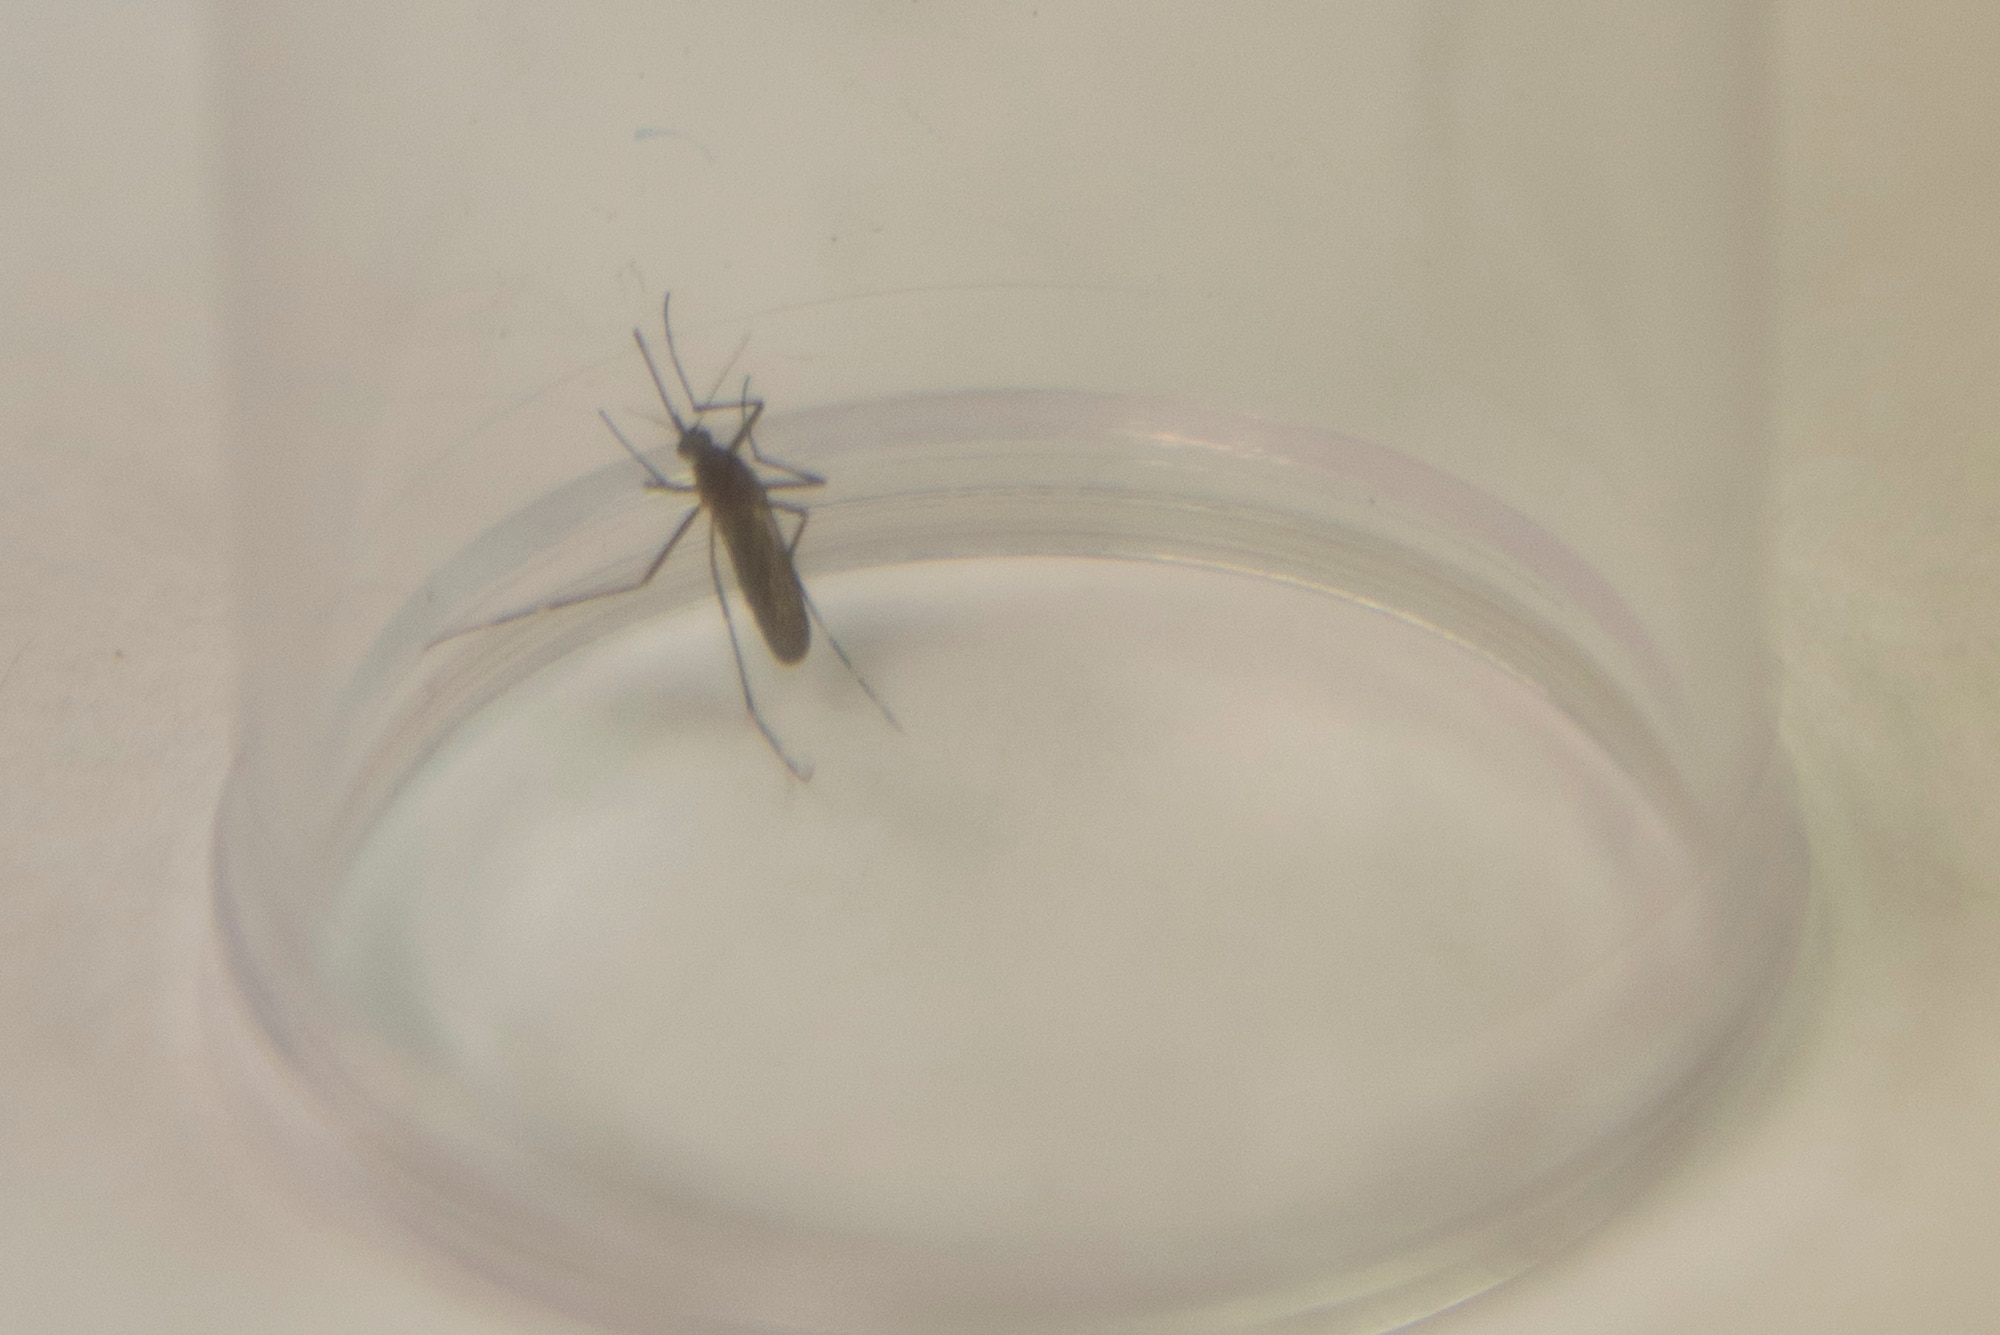 A mosquito sits in a container prior to being examined for control measures, March 23, 2016, at Moody Air Force Base, Ga. The 23d Civil Engineer Squadron entomologists collect and send specimens to Wright-Patterson AFB, Oh., who are responsible for identifying species and testing the specimens for diseases. (U.S. Air Force photo by Airman 1st Class Greg Nash/Released) 